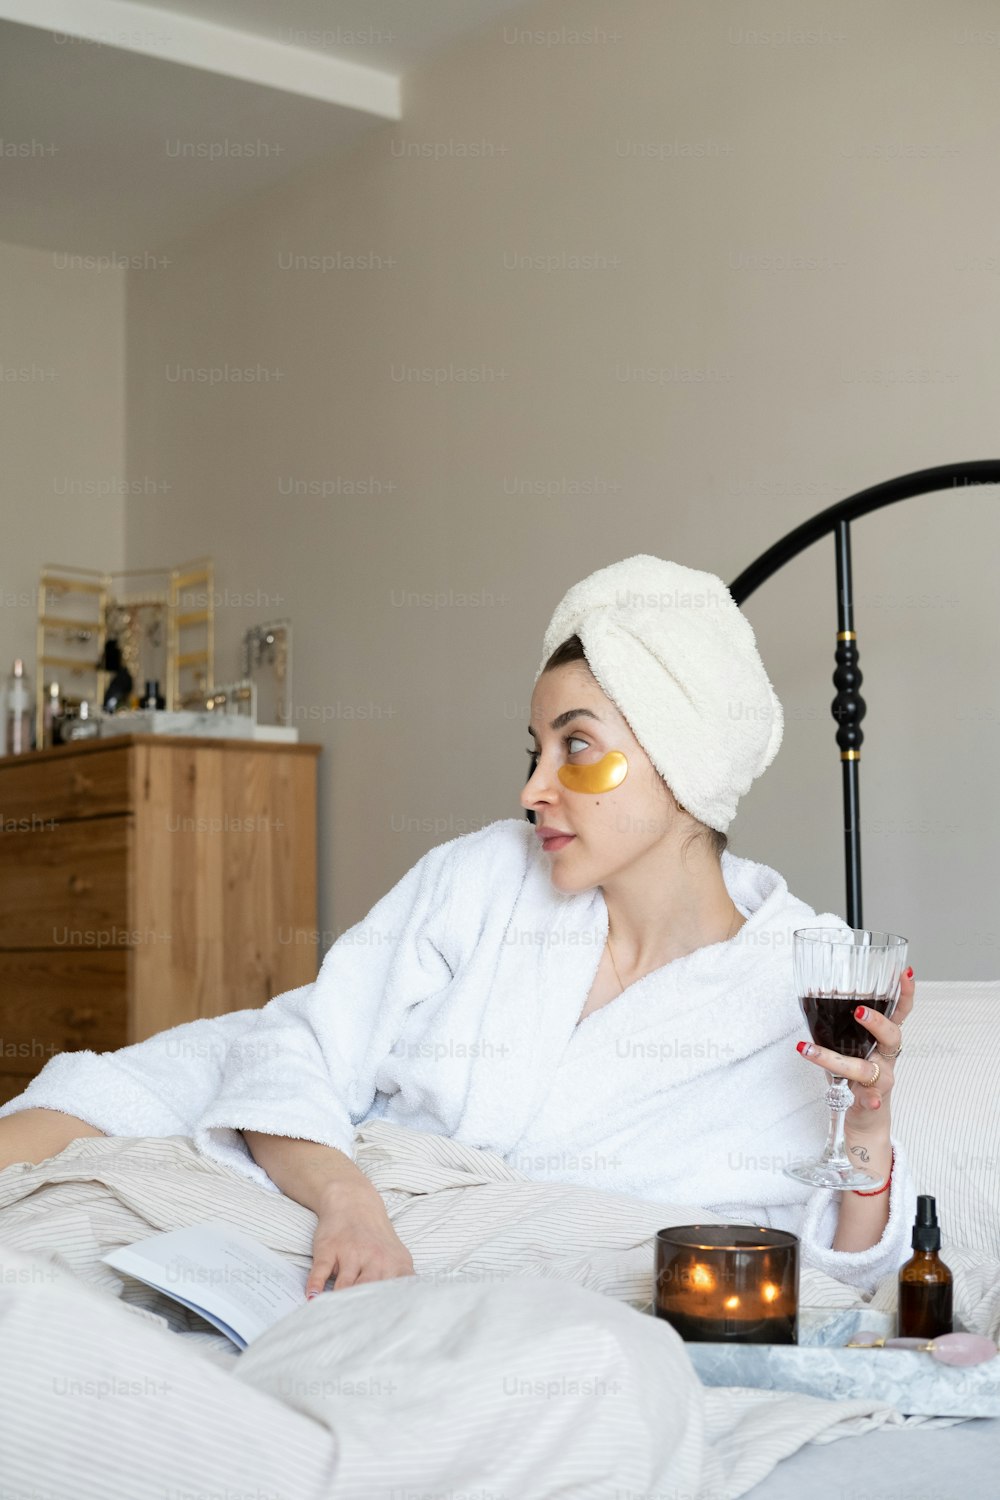 a woman in a bathrobe holding a glass of wine